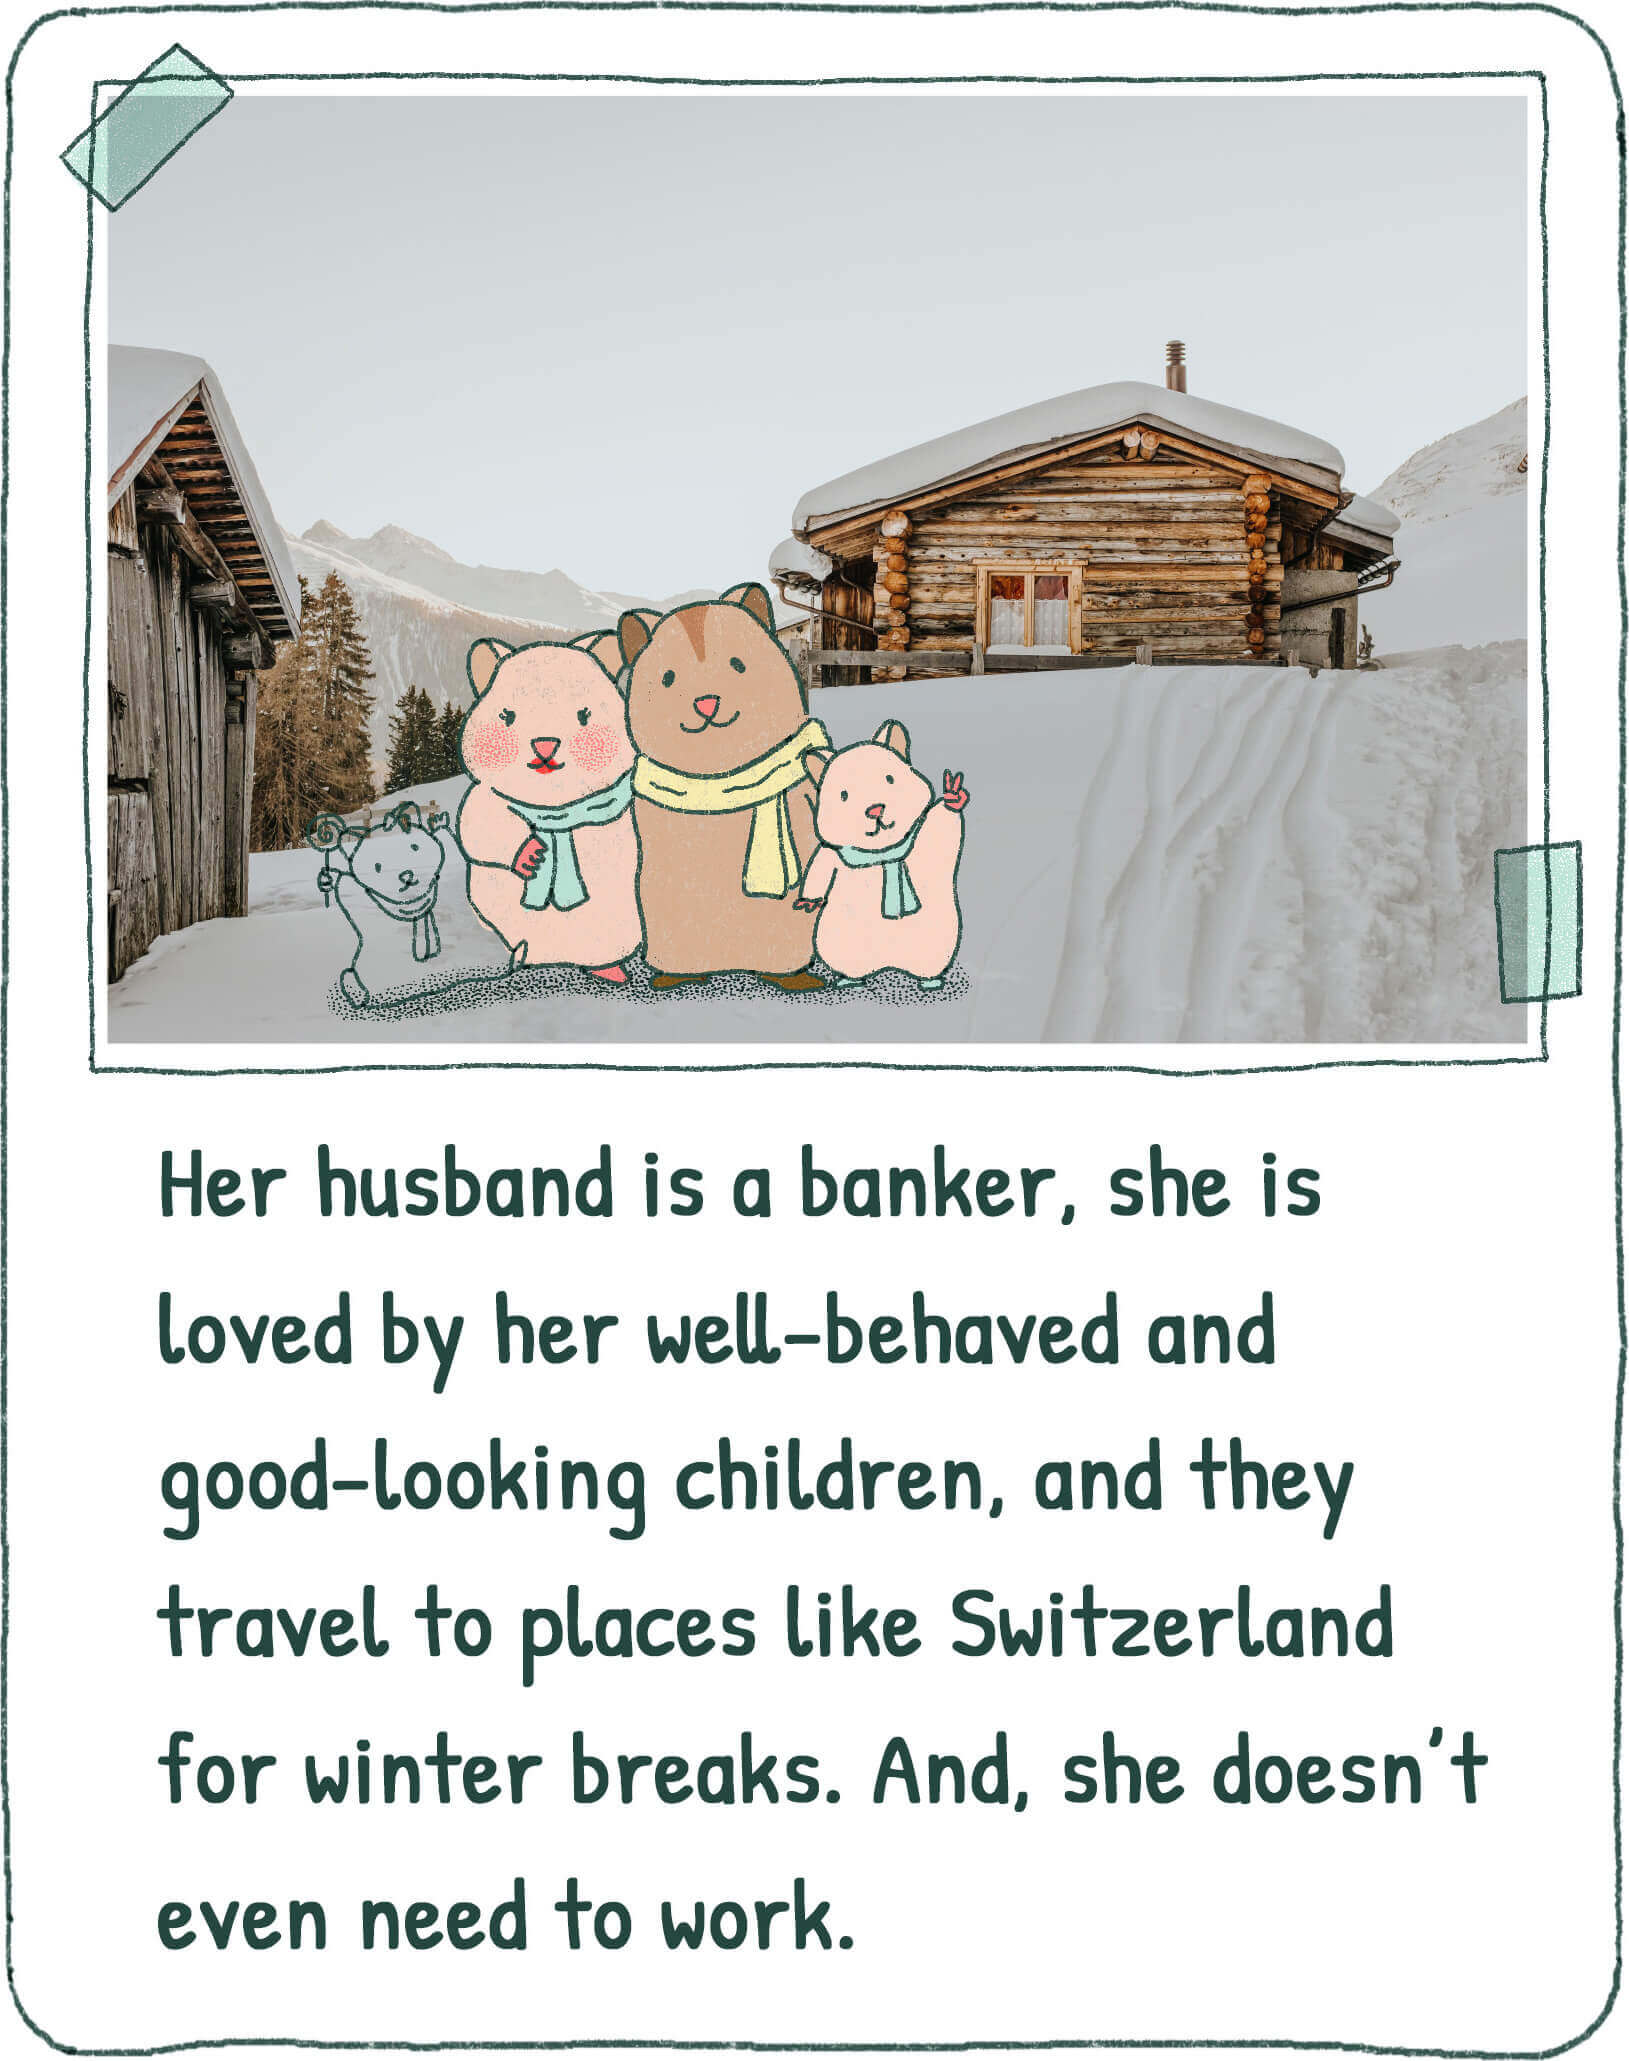 Her husband is a banker, she is loved by her well-behaved and good-looking children, and they travel to places like Switzerland for winter breaks. And, she doesn't even need to work.